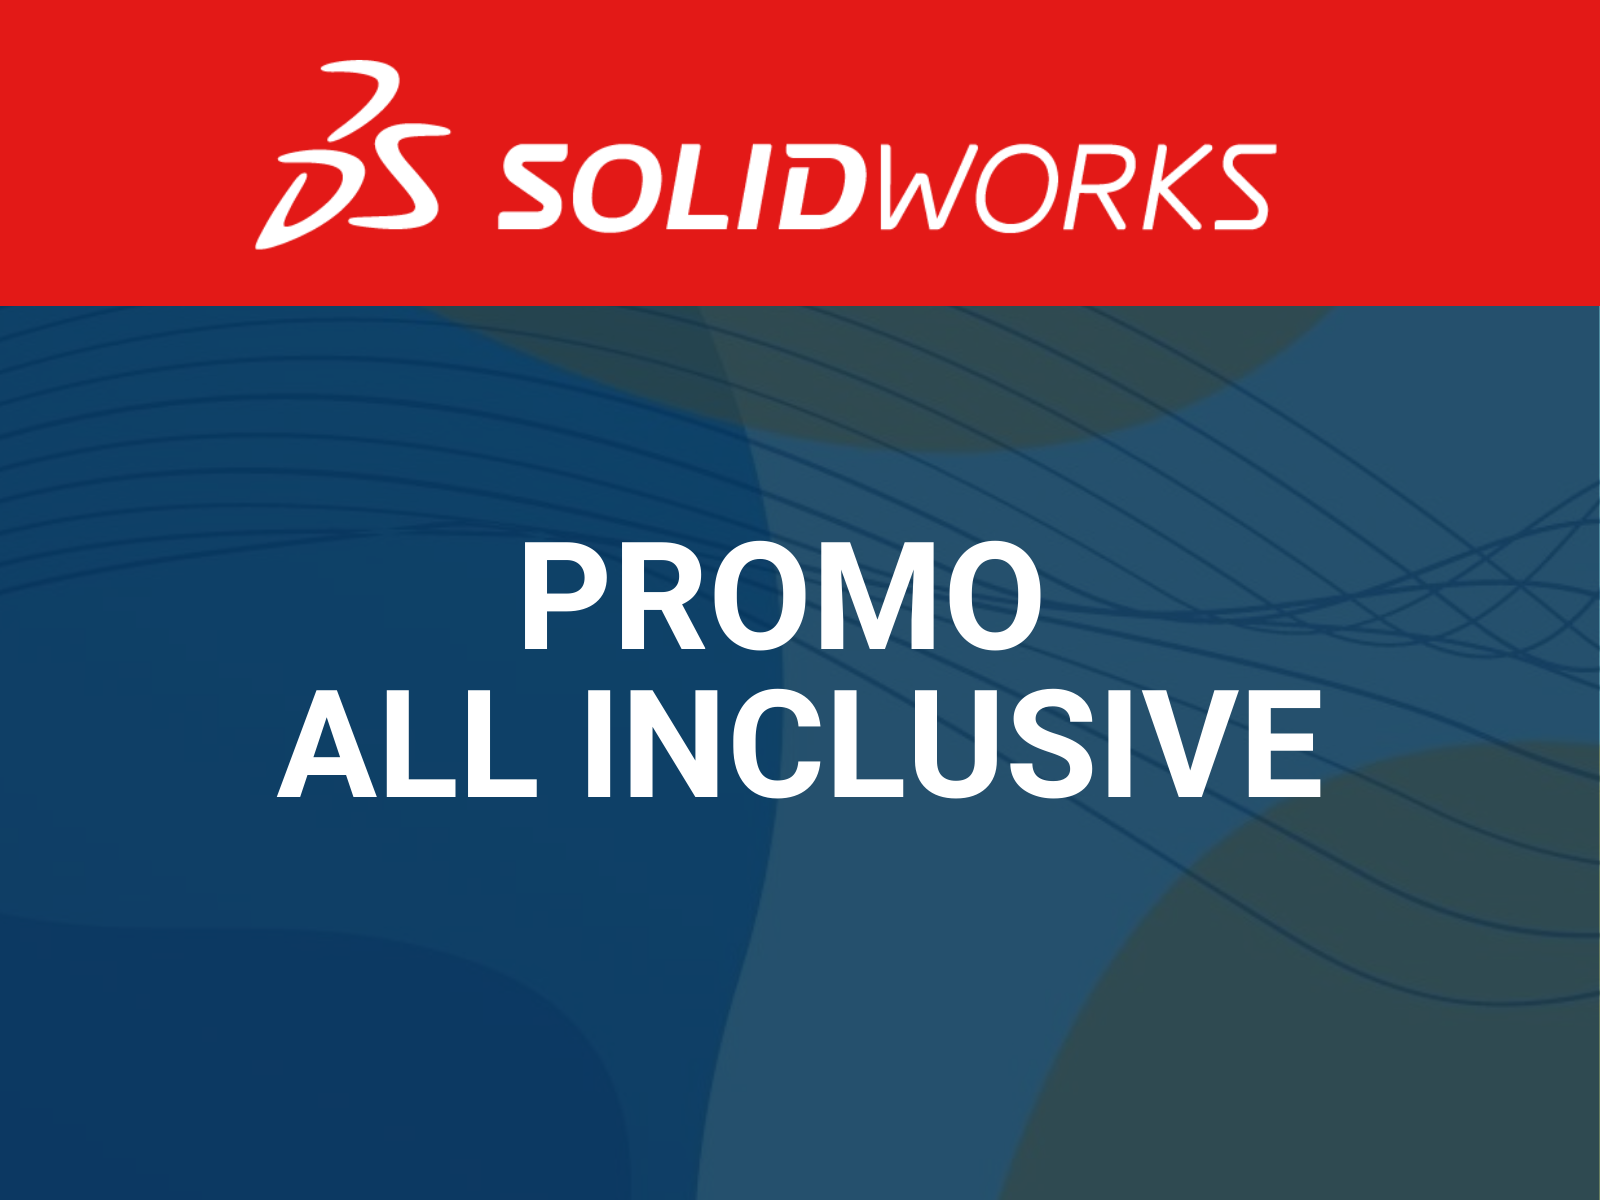 All Inclusive Promo SolidWorks Nuovamacut